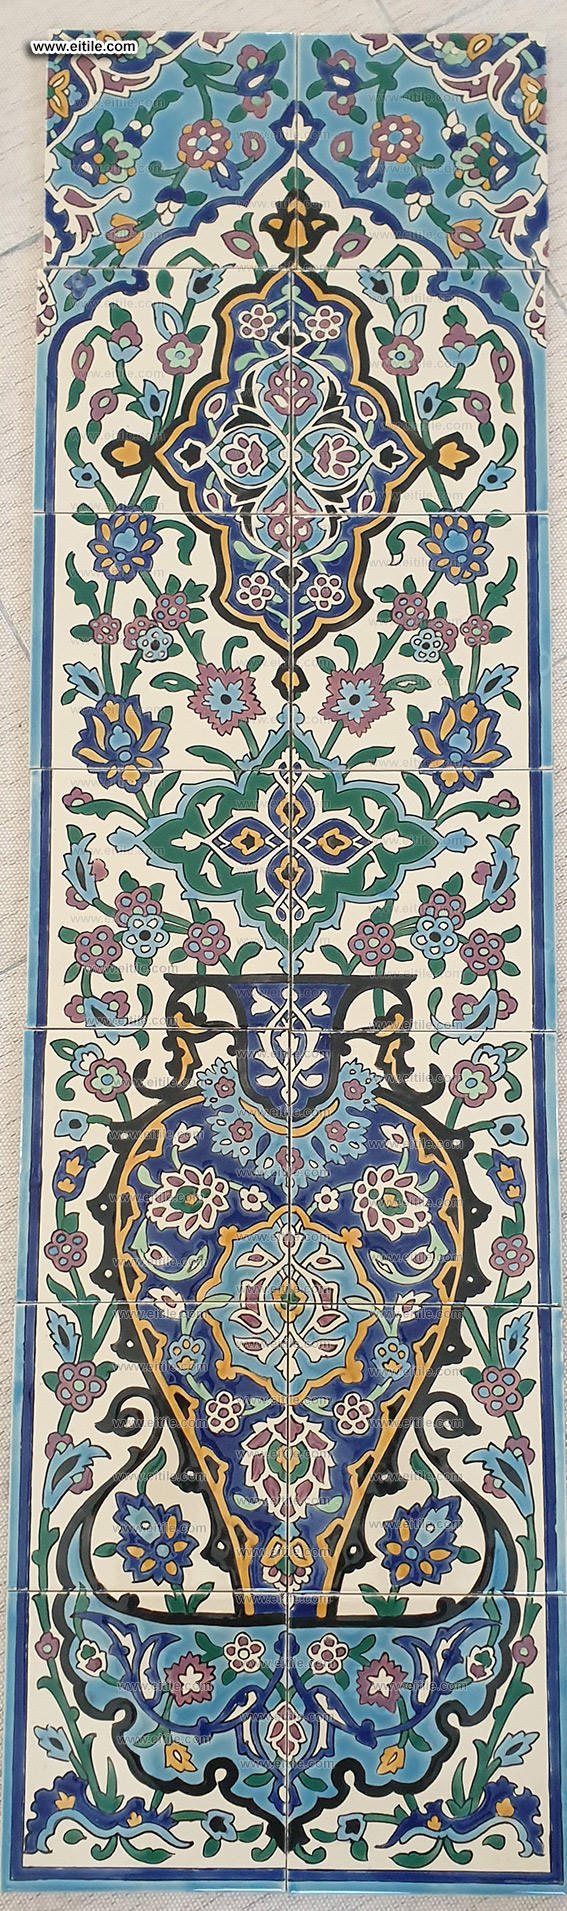 Mosque tile for outside wall, www.eitile.com